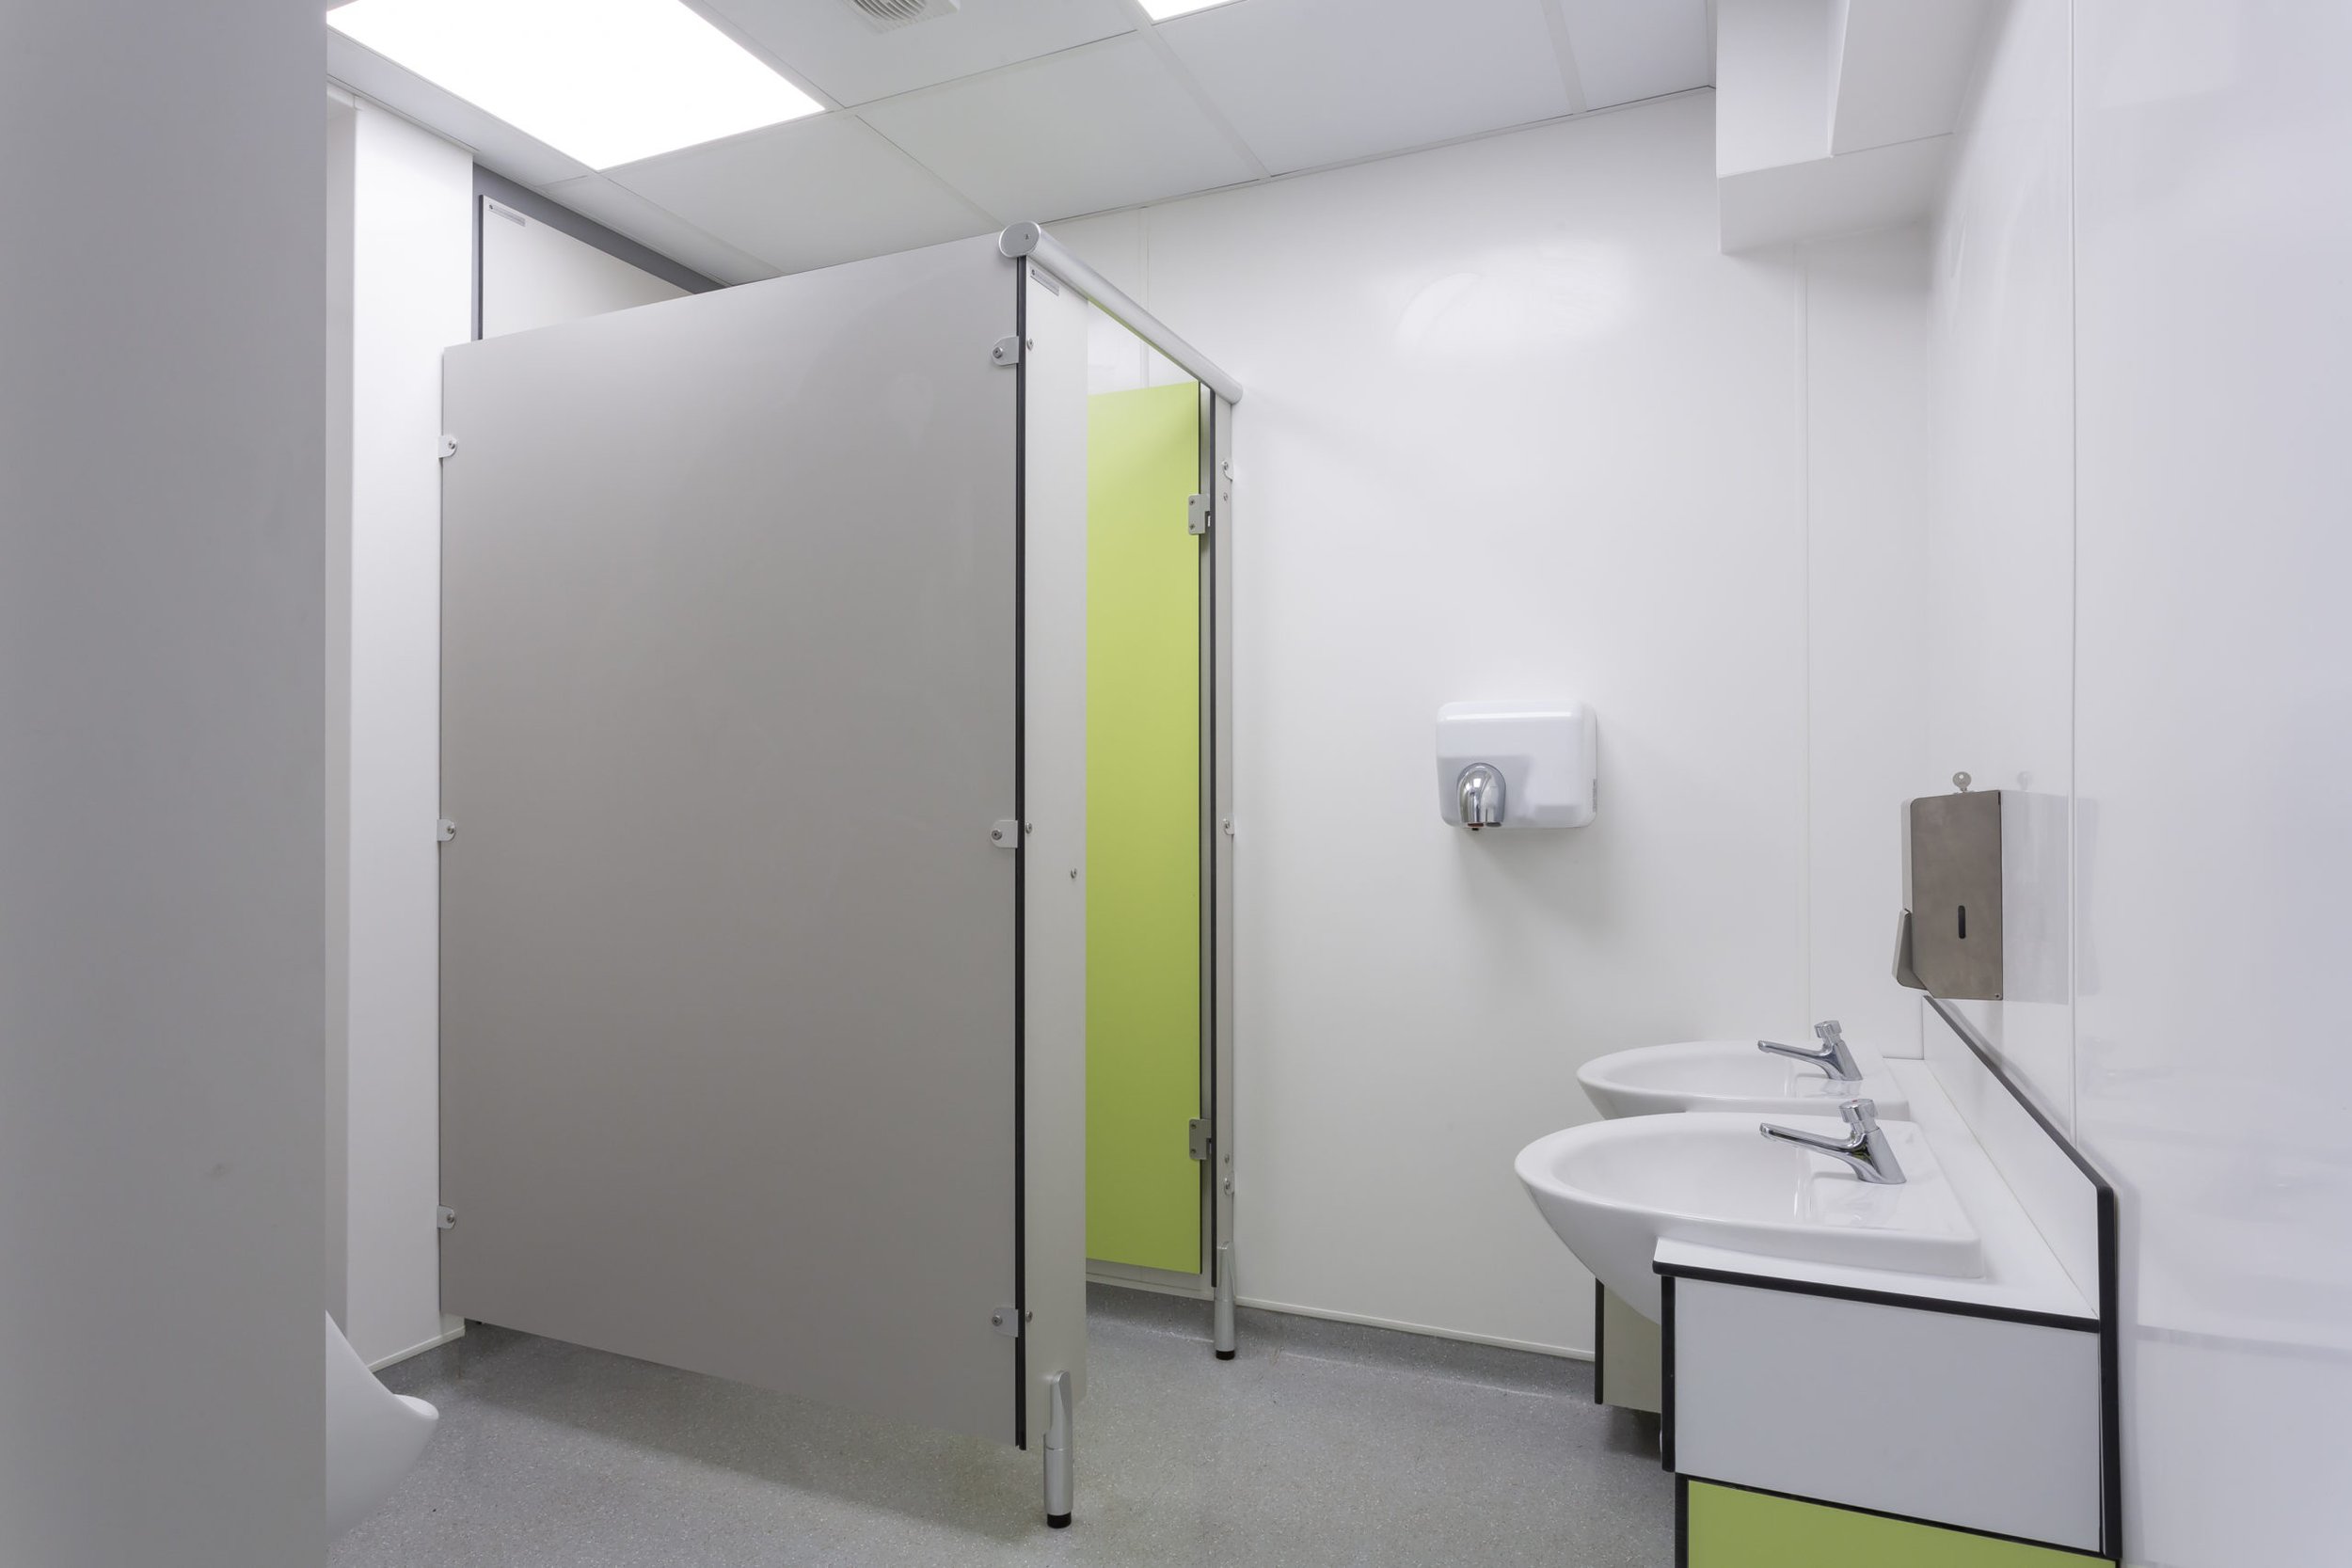 toilet cubicle and vanity unit in green and grey colours at cliff park school.jpg